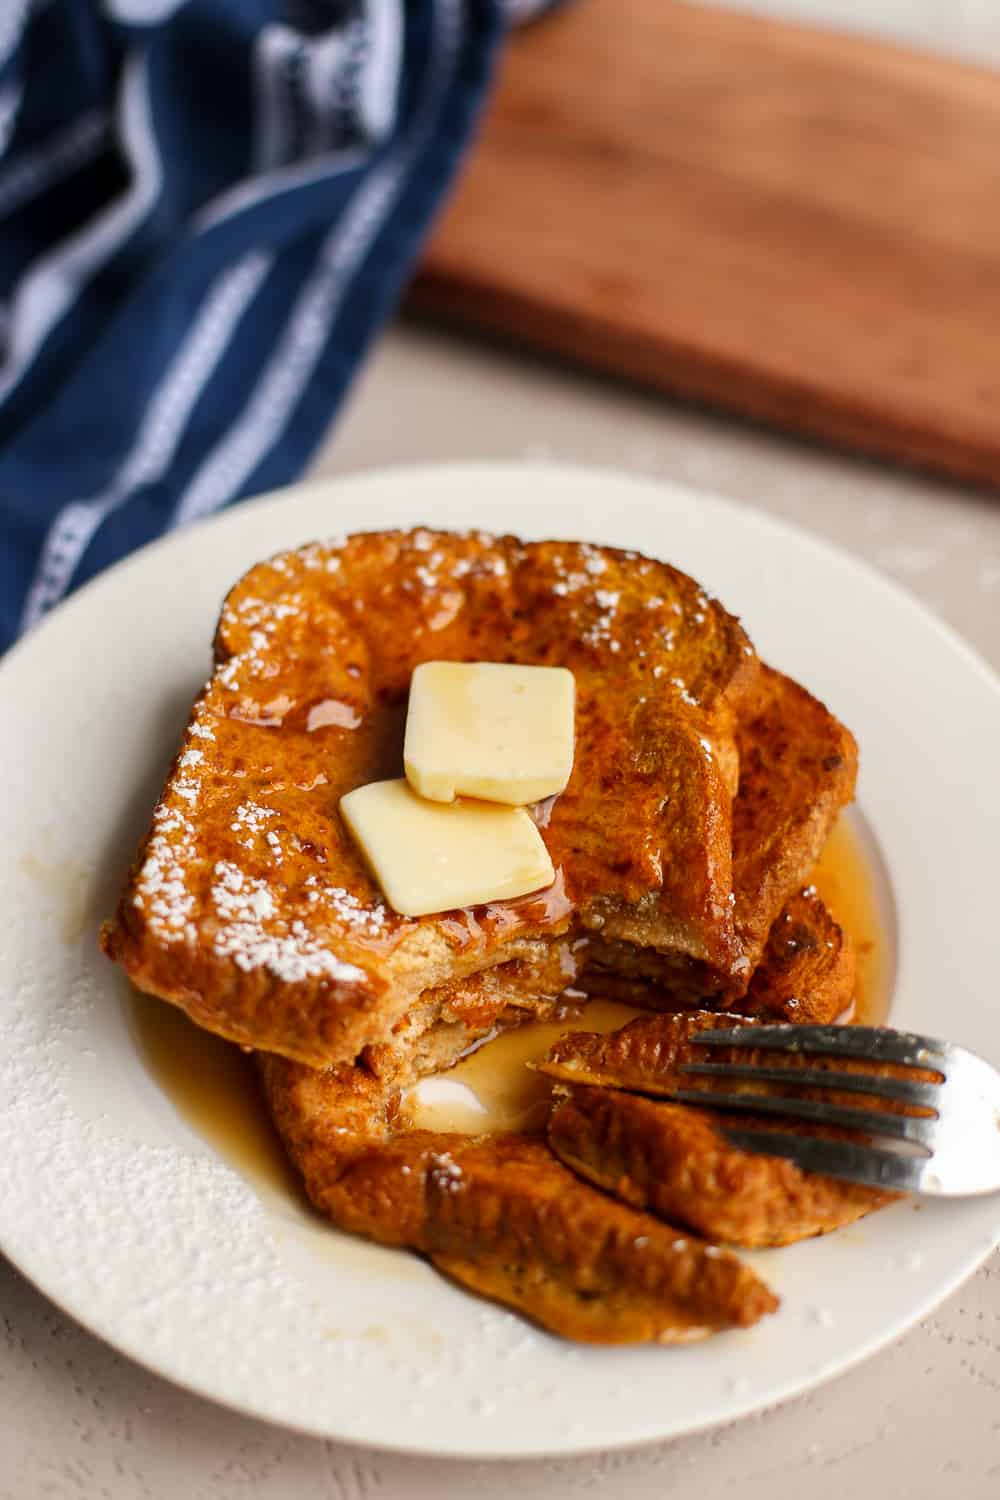 Pumpkin French Toast being cut into by a fork.